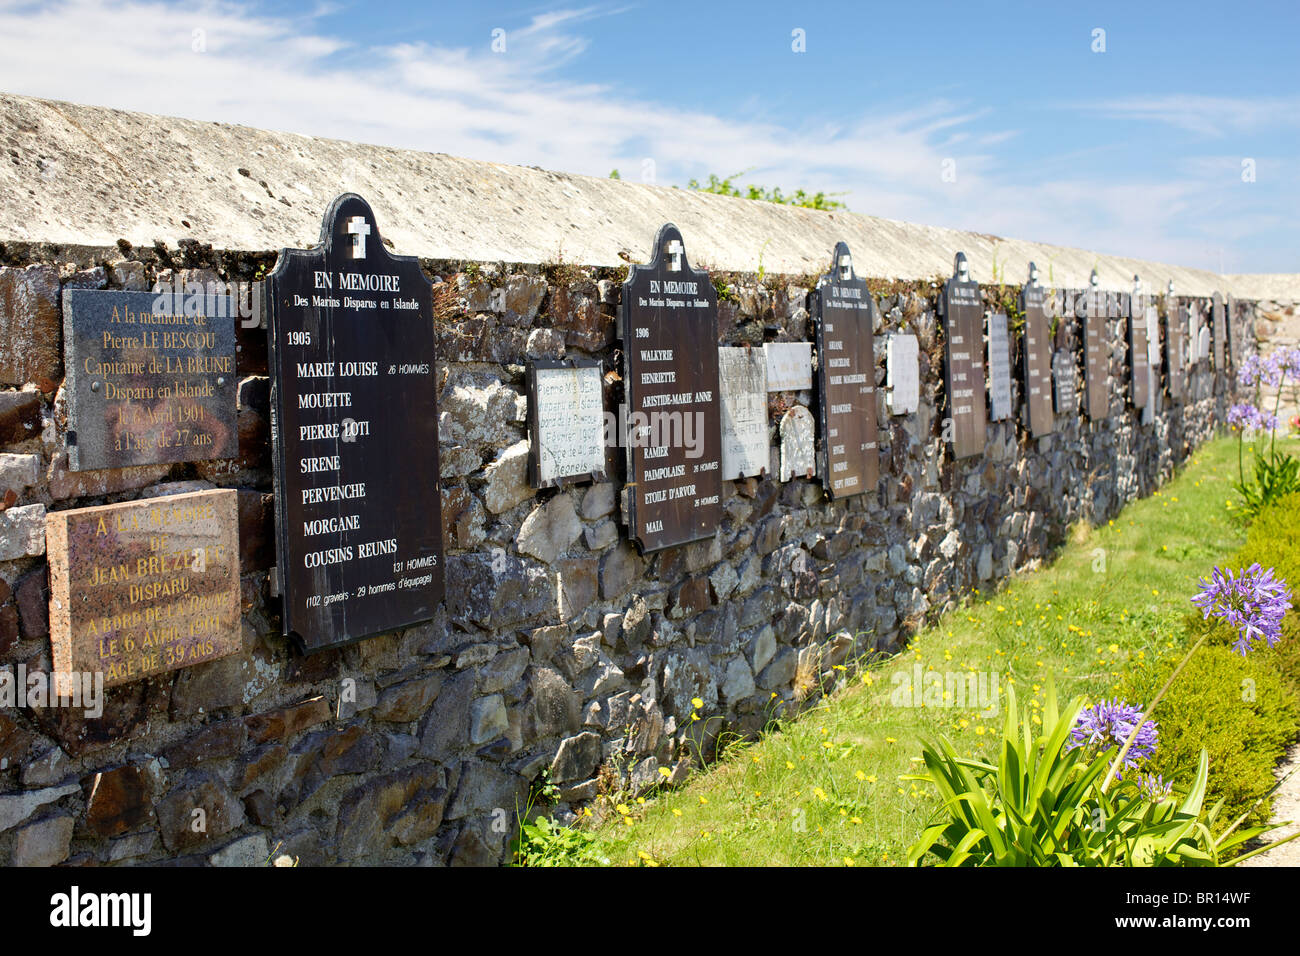 Memorial wall for sailors lost at sea in Ploubazlanec in Brittany France Stock Photo